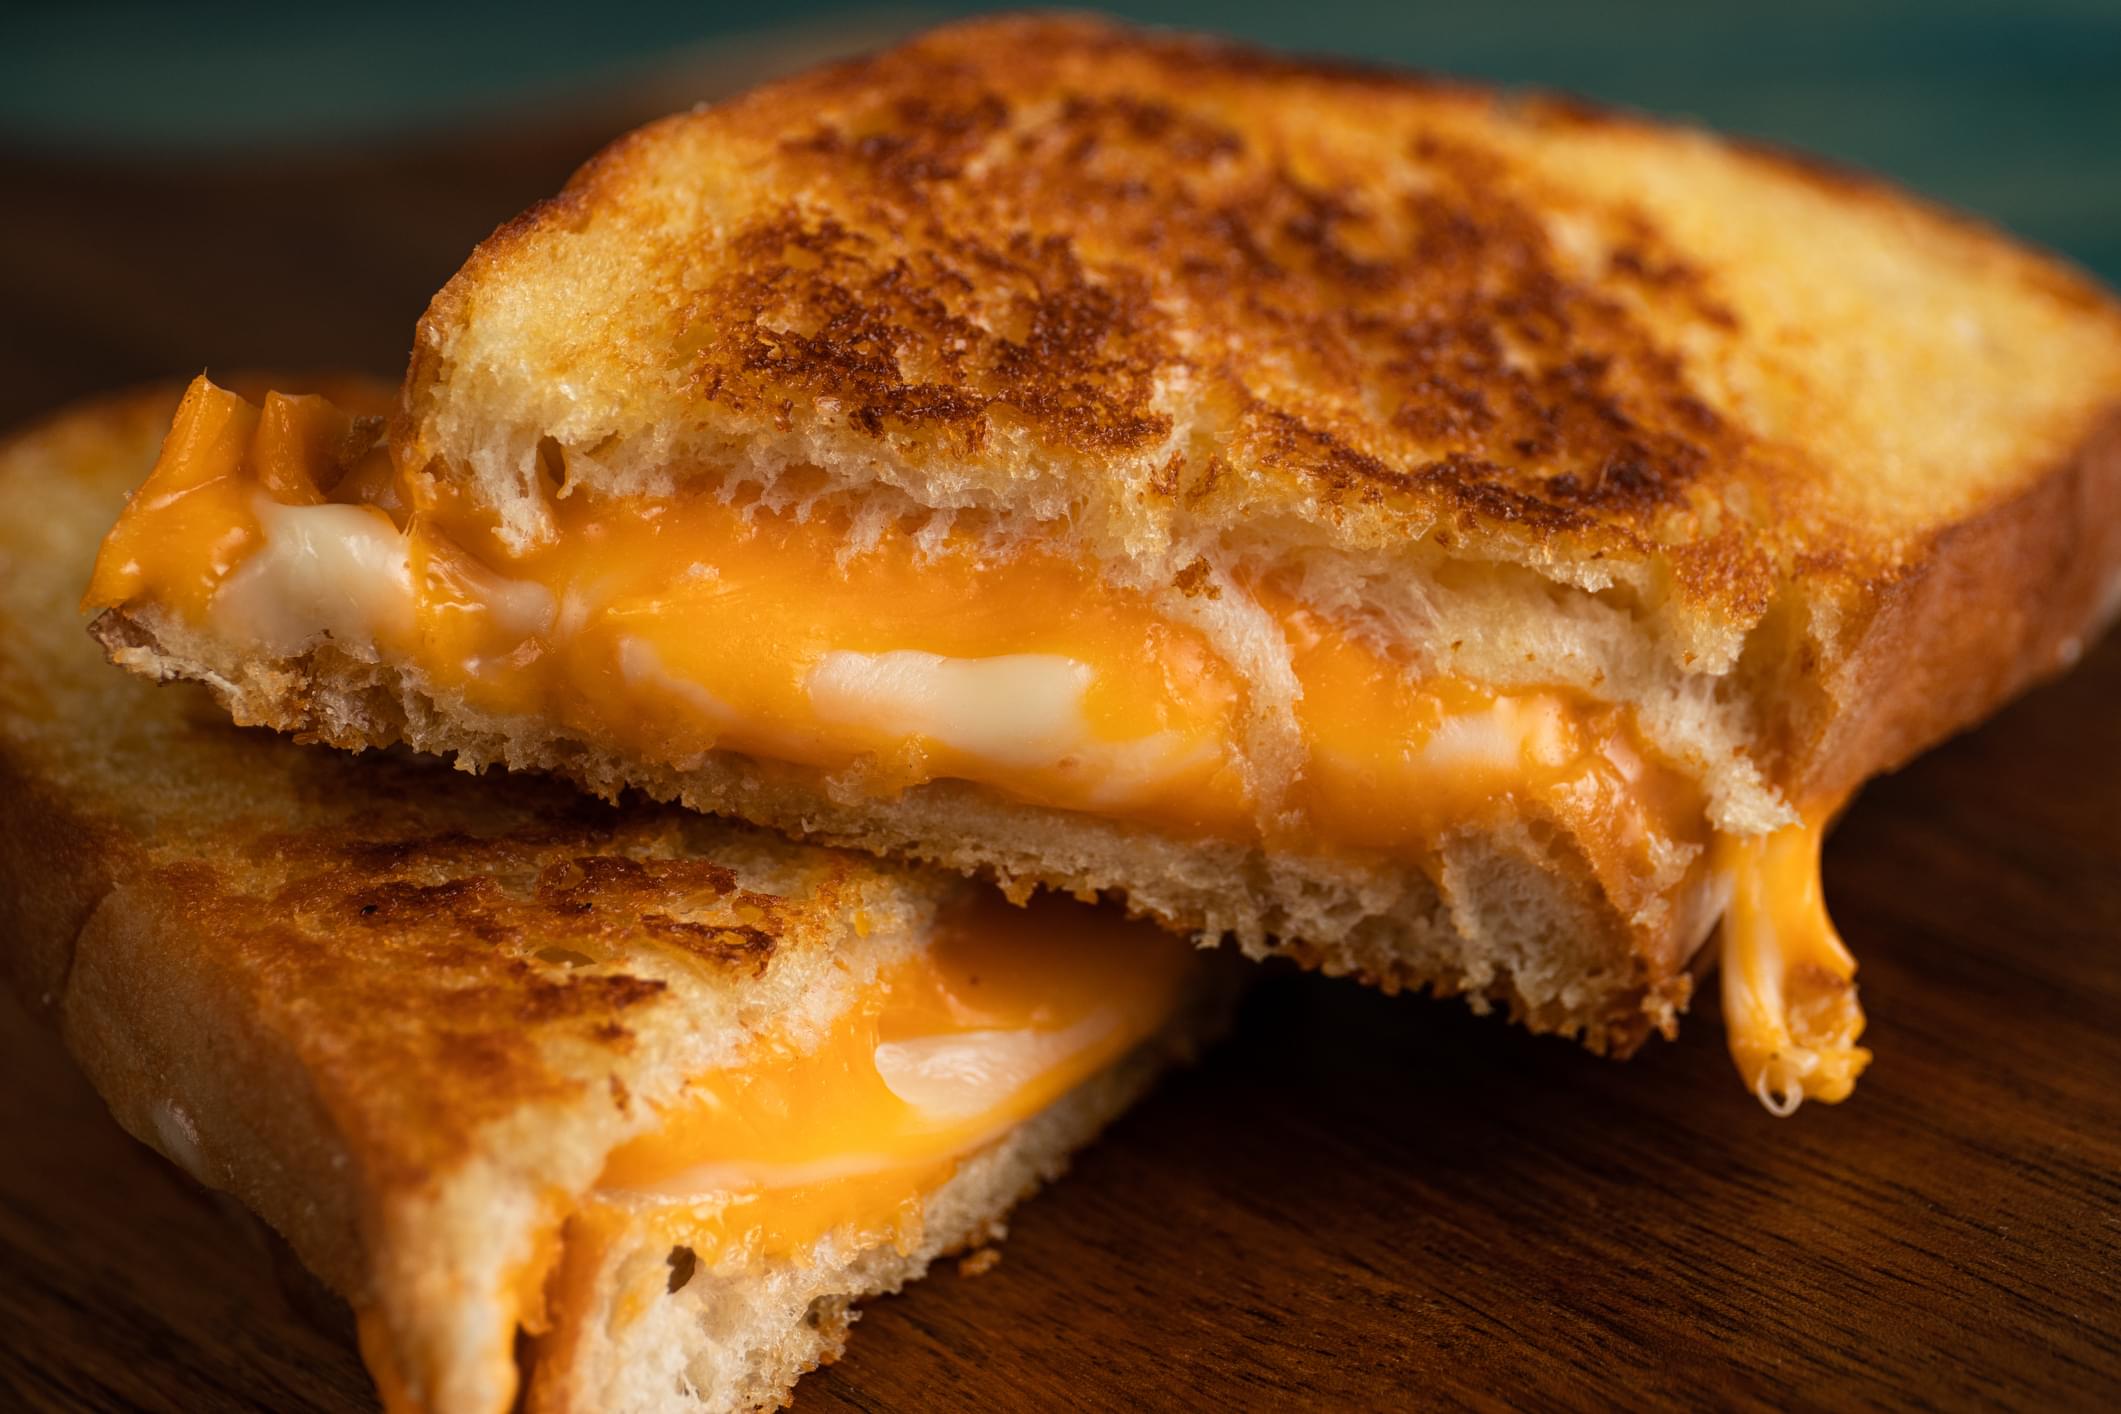 PODCAST – Wednesday, July 15: Mustard On A Grilled Cheese? Y/N?